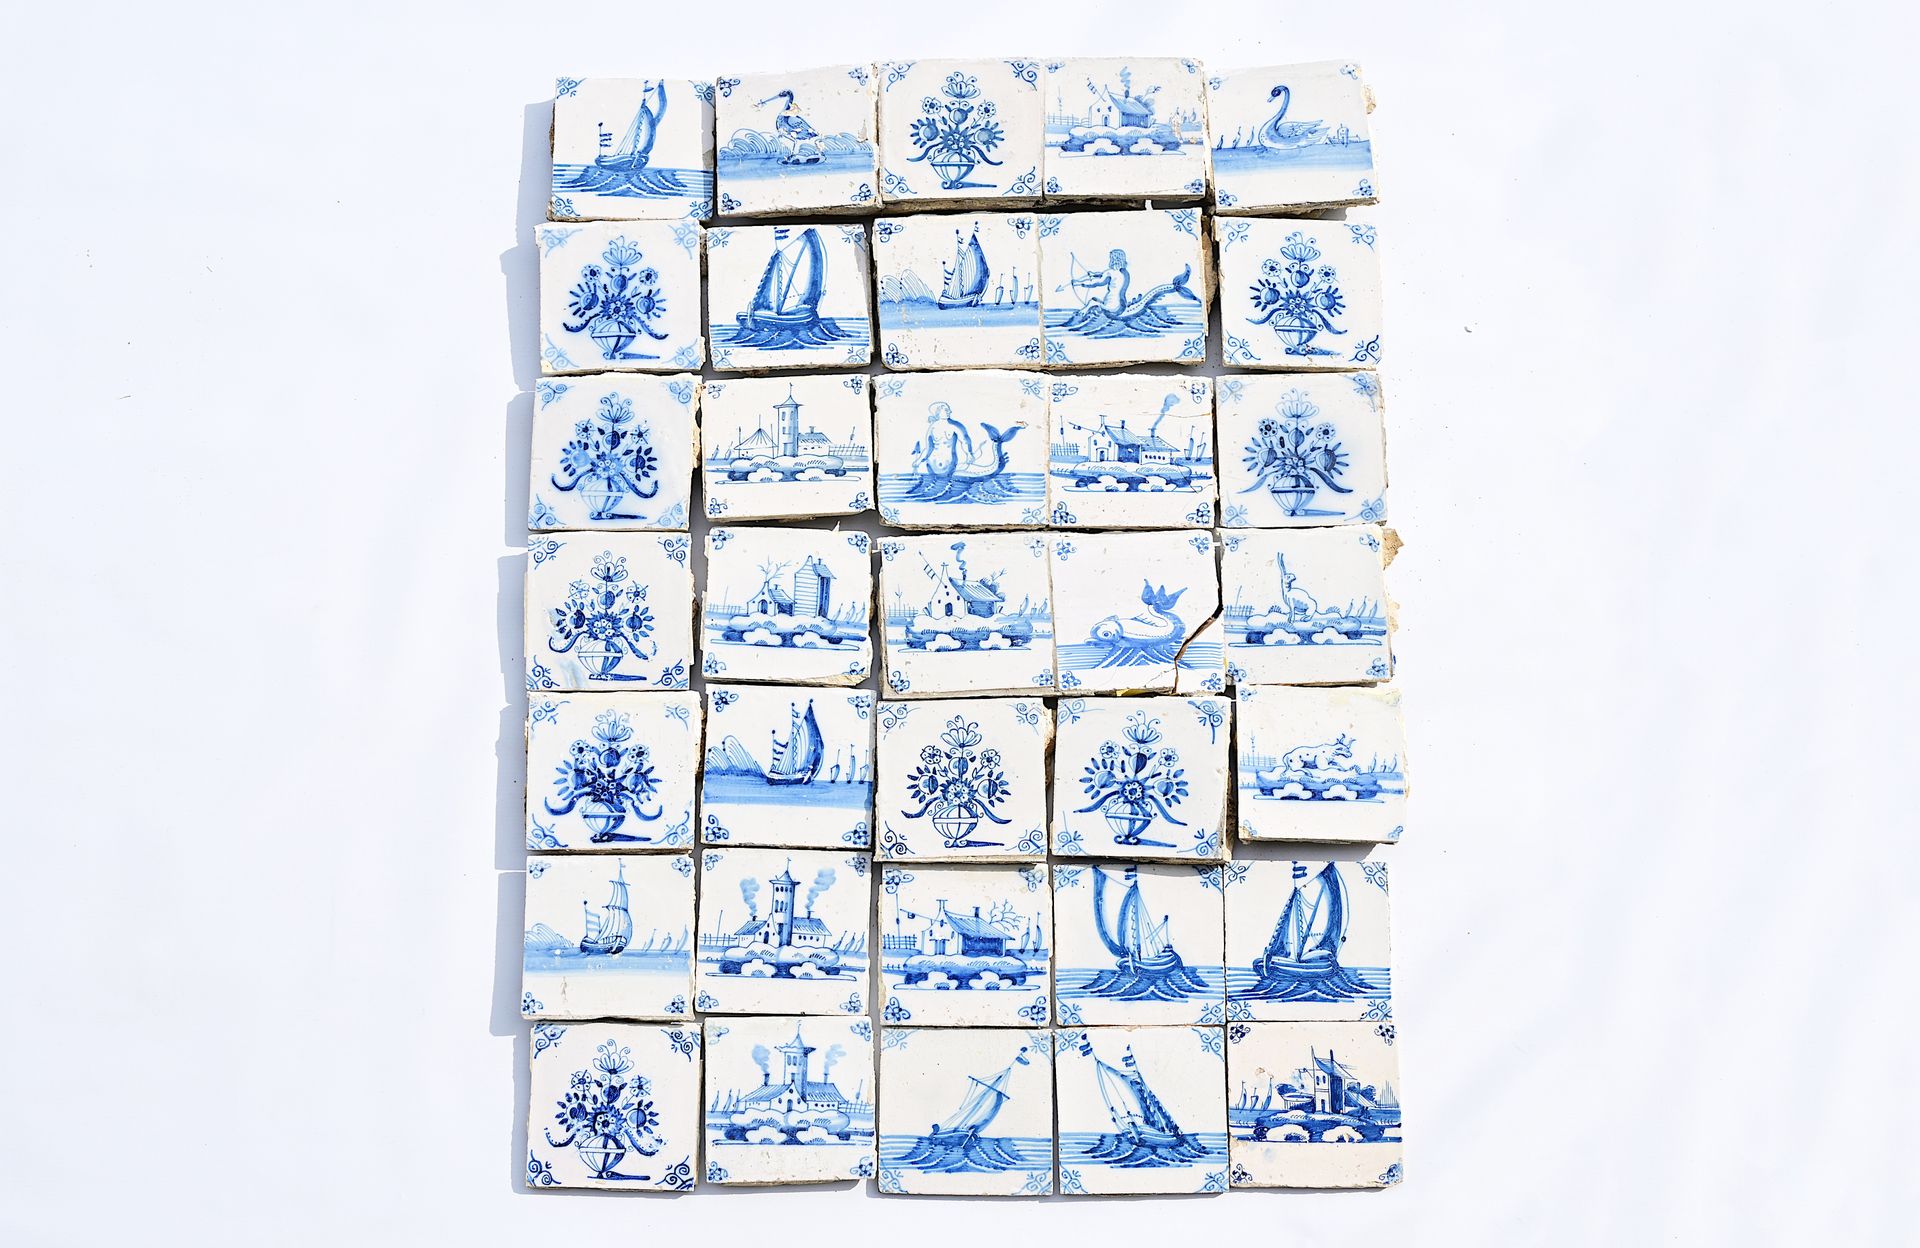 A varied collection of Dutch Delft blue and white tiles with flowers, boats, ani&hellip;